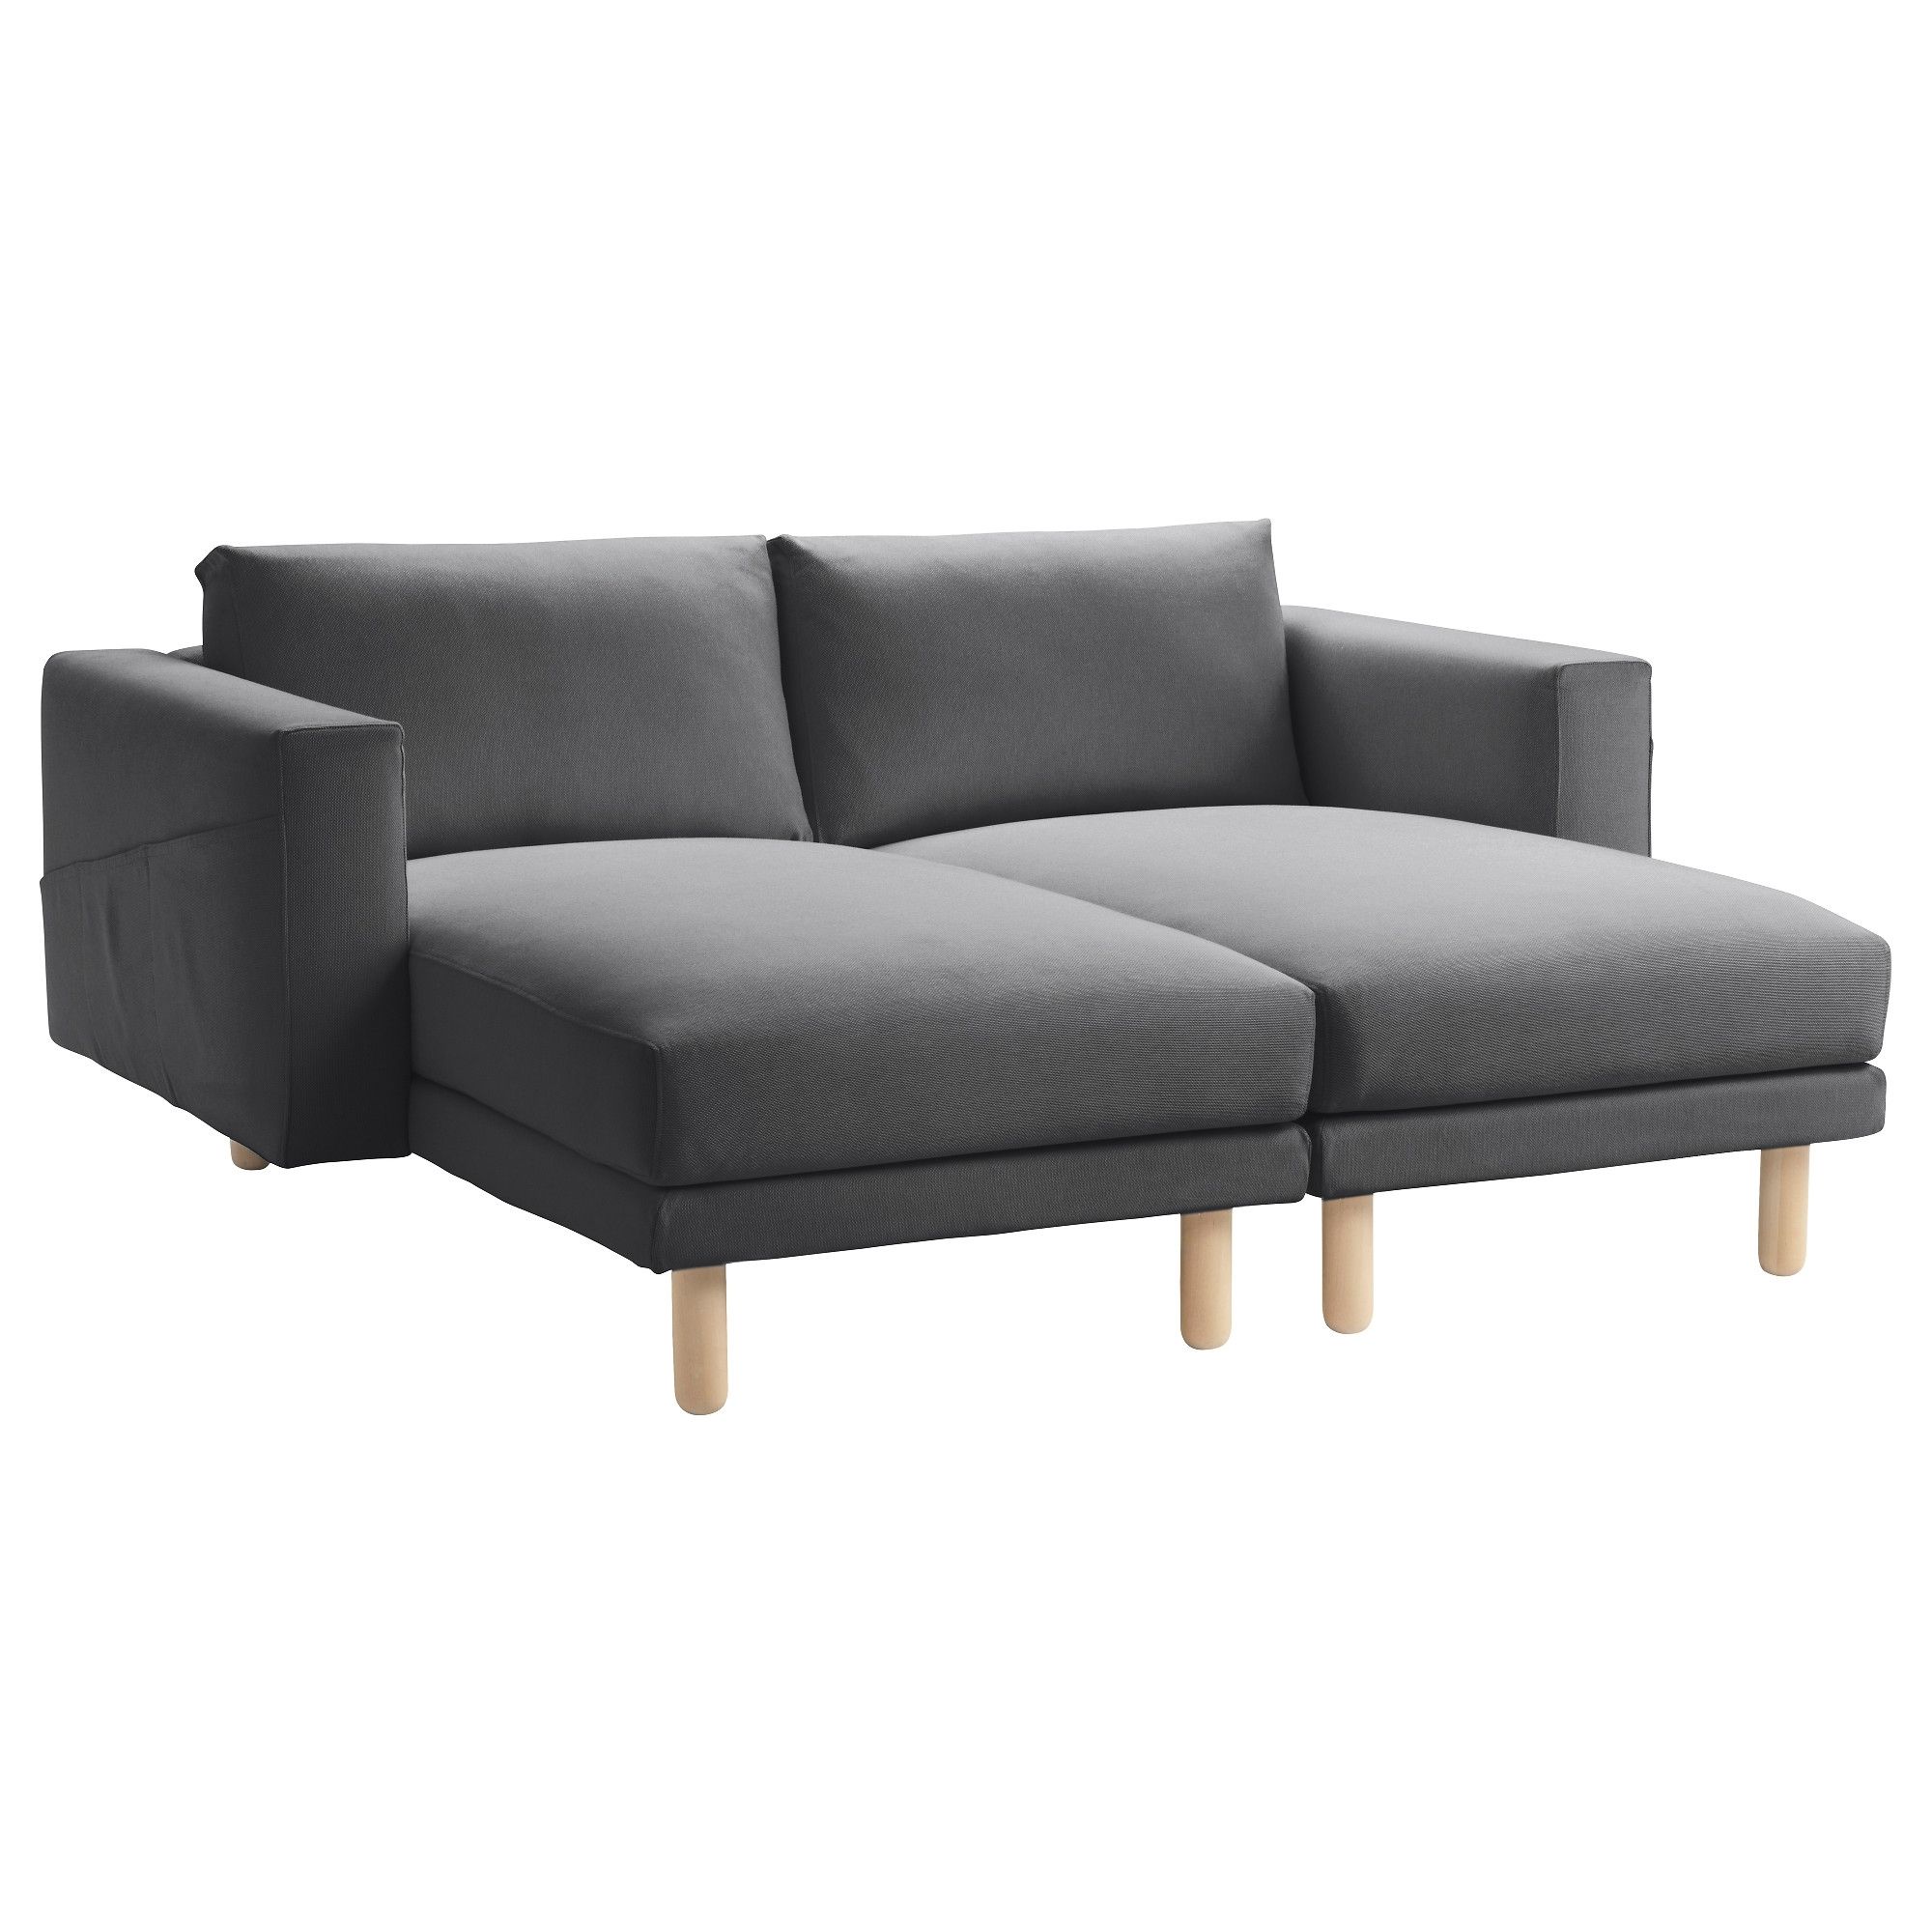 Ikea Chaise Lounge Chairs Regarding Well Known Norsborg Sectional, 2 Seat – Finnsta Dark Gray – Ikea (View 6 of 15)